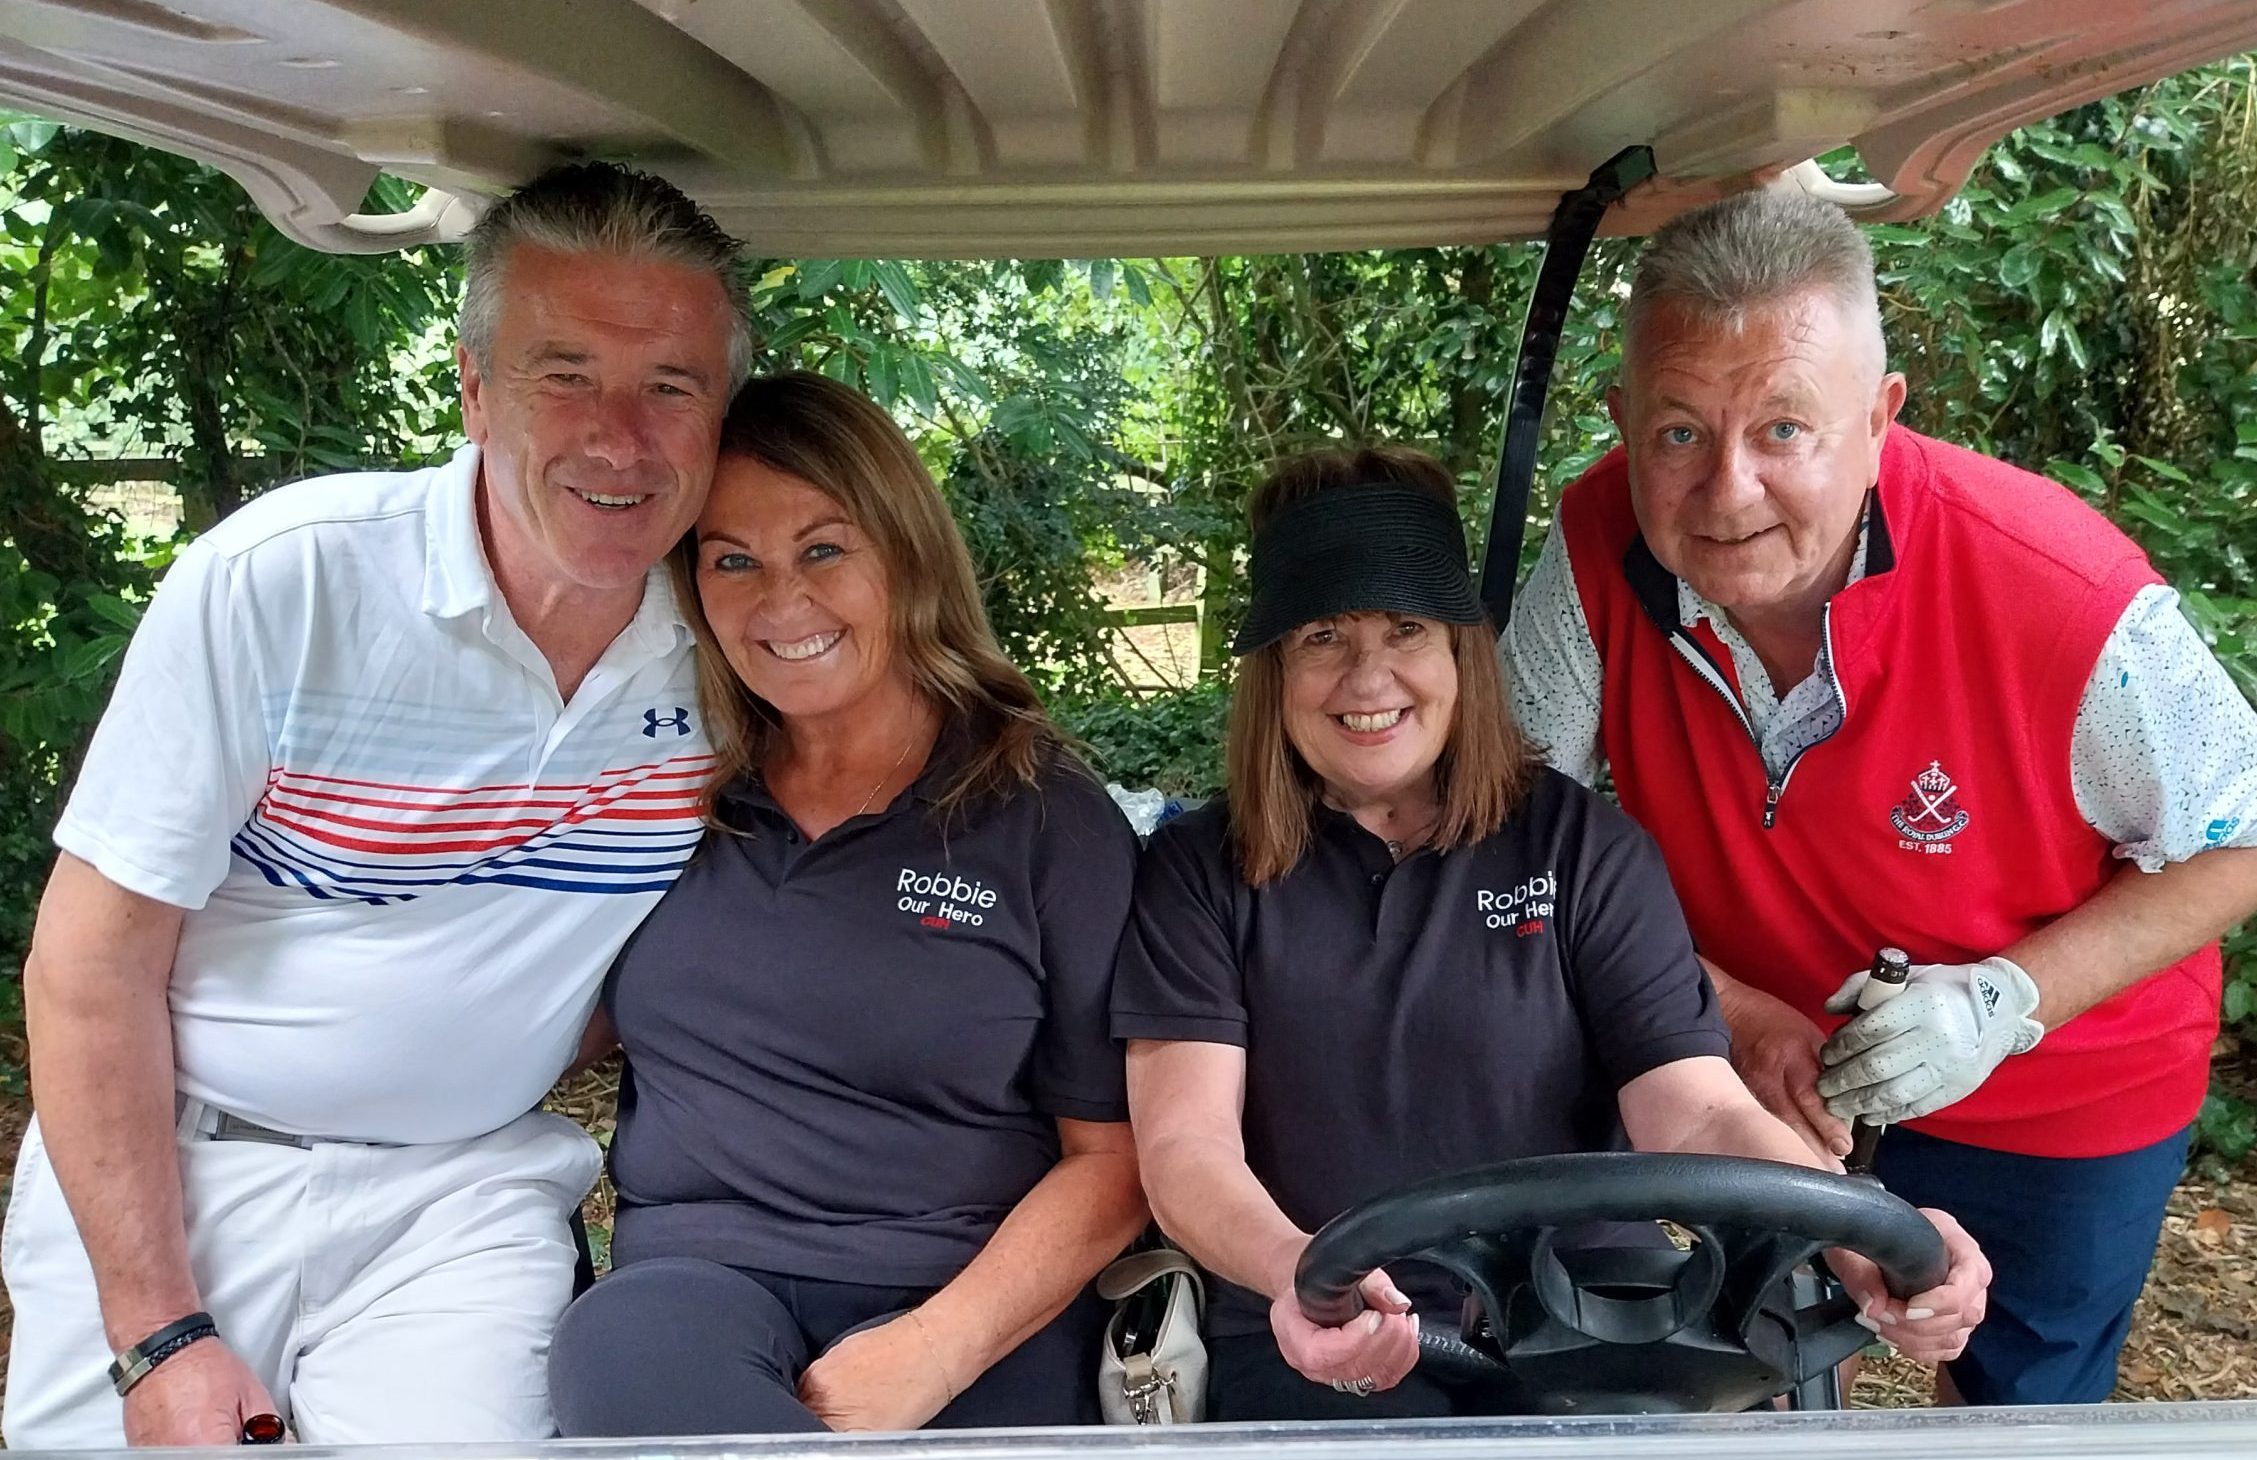 Congratulations Helena Crowley for making “Our Hero Robbie” and CUH golf day a Memorable classic